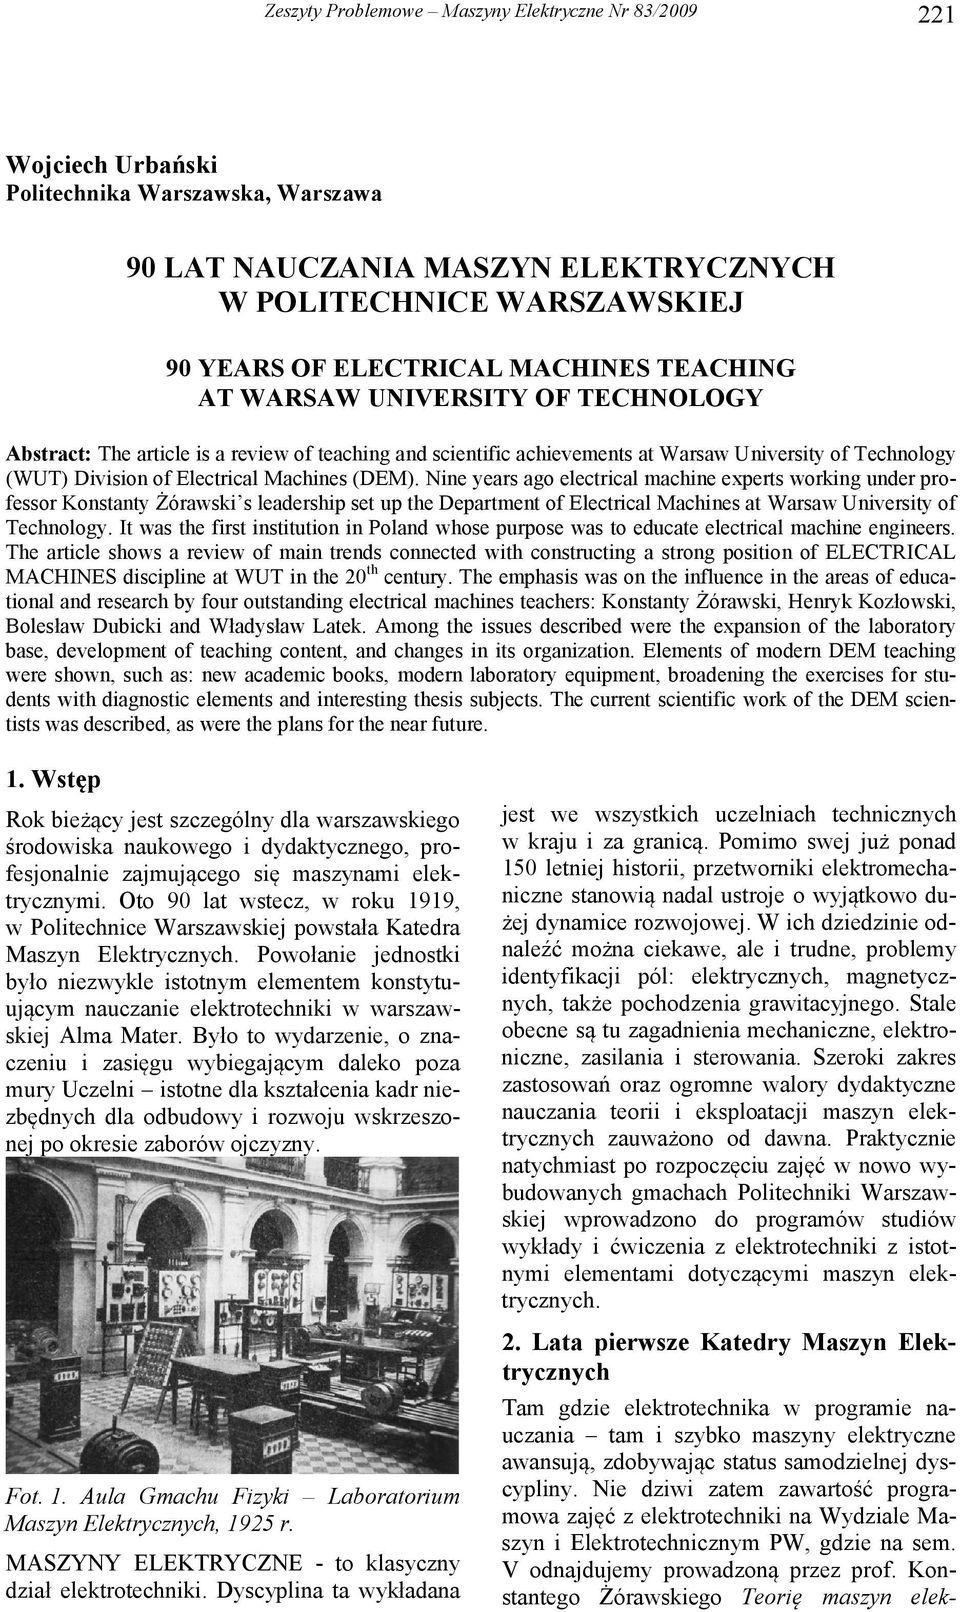 Nine years ago electrical machine experts working under professor Konstanty Żórawski s leadership set up the Department of Electrical Machines at Warsaw University of Technology.